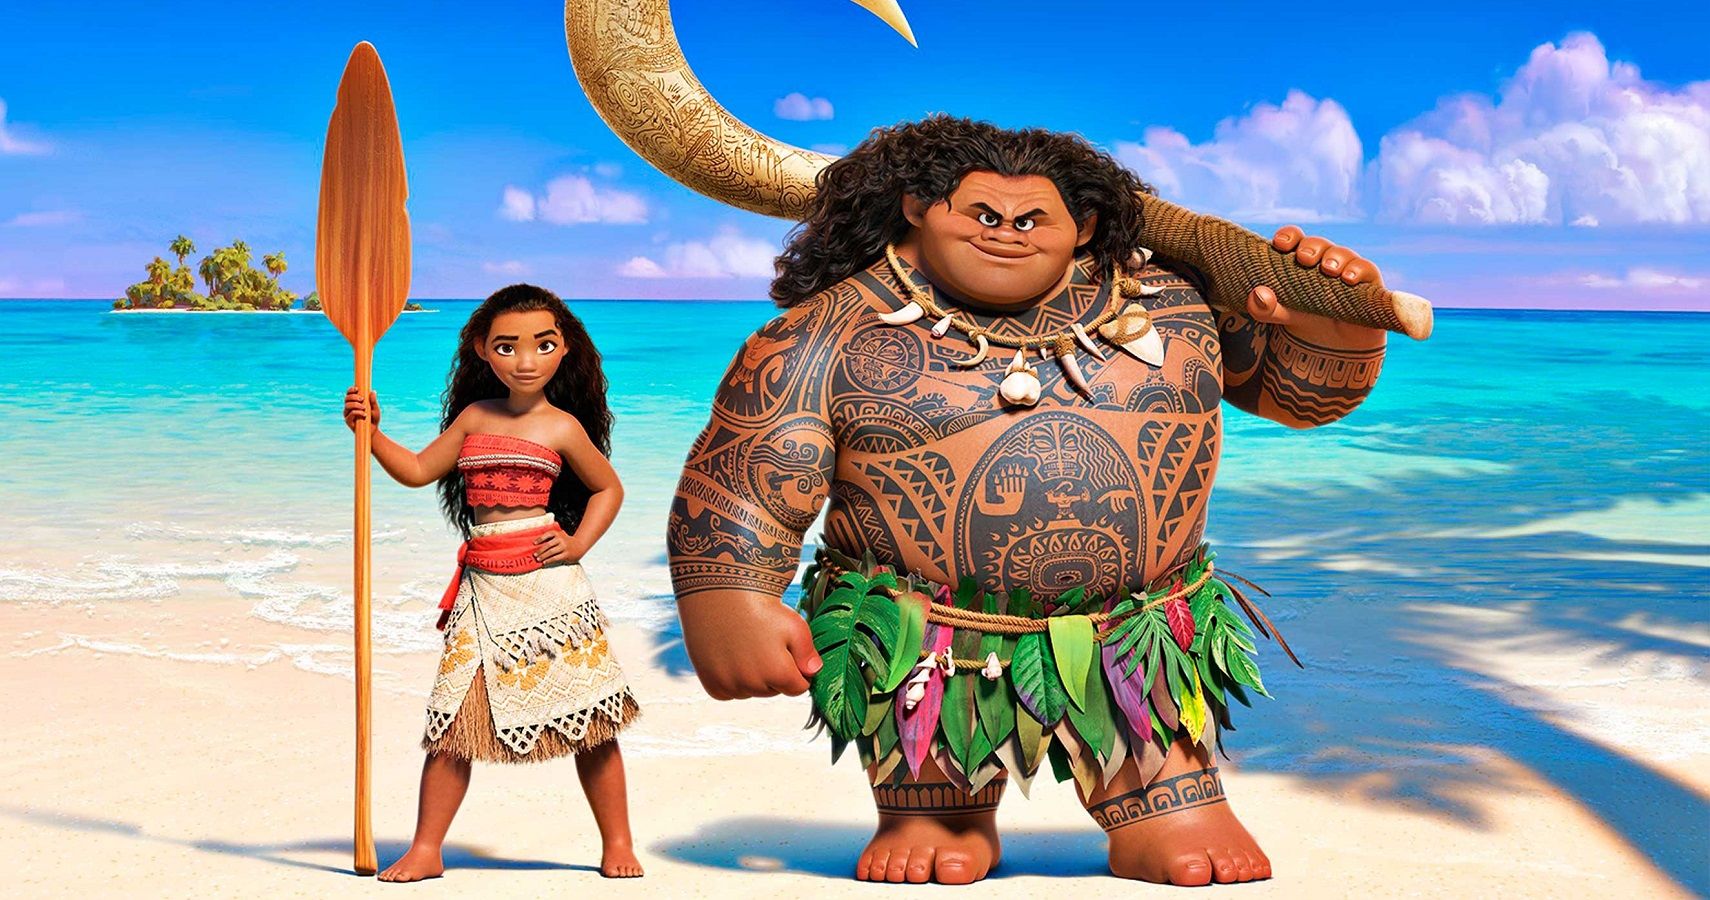 10 Hilarious Moana Memes That Are Too Funny